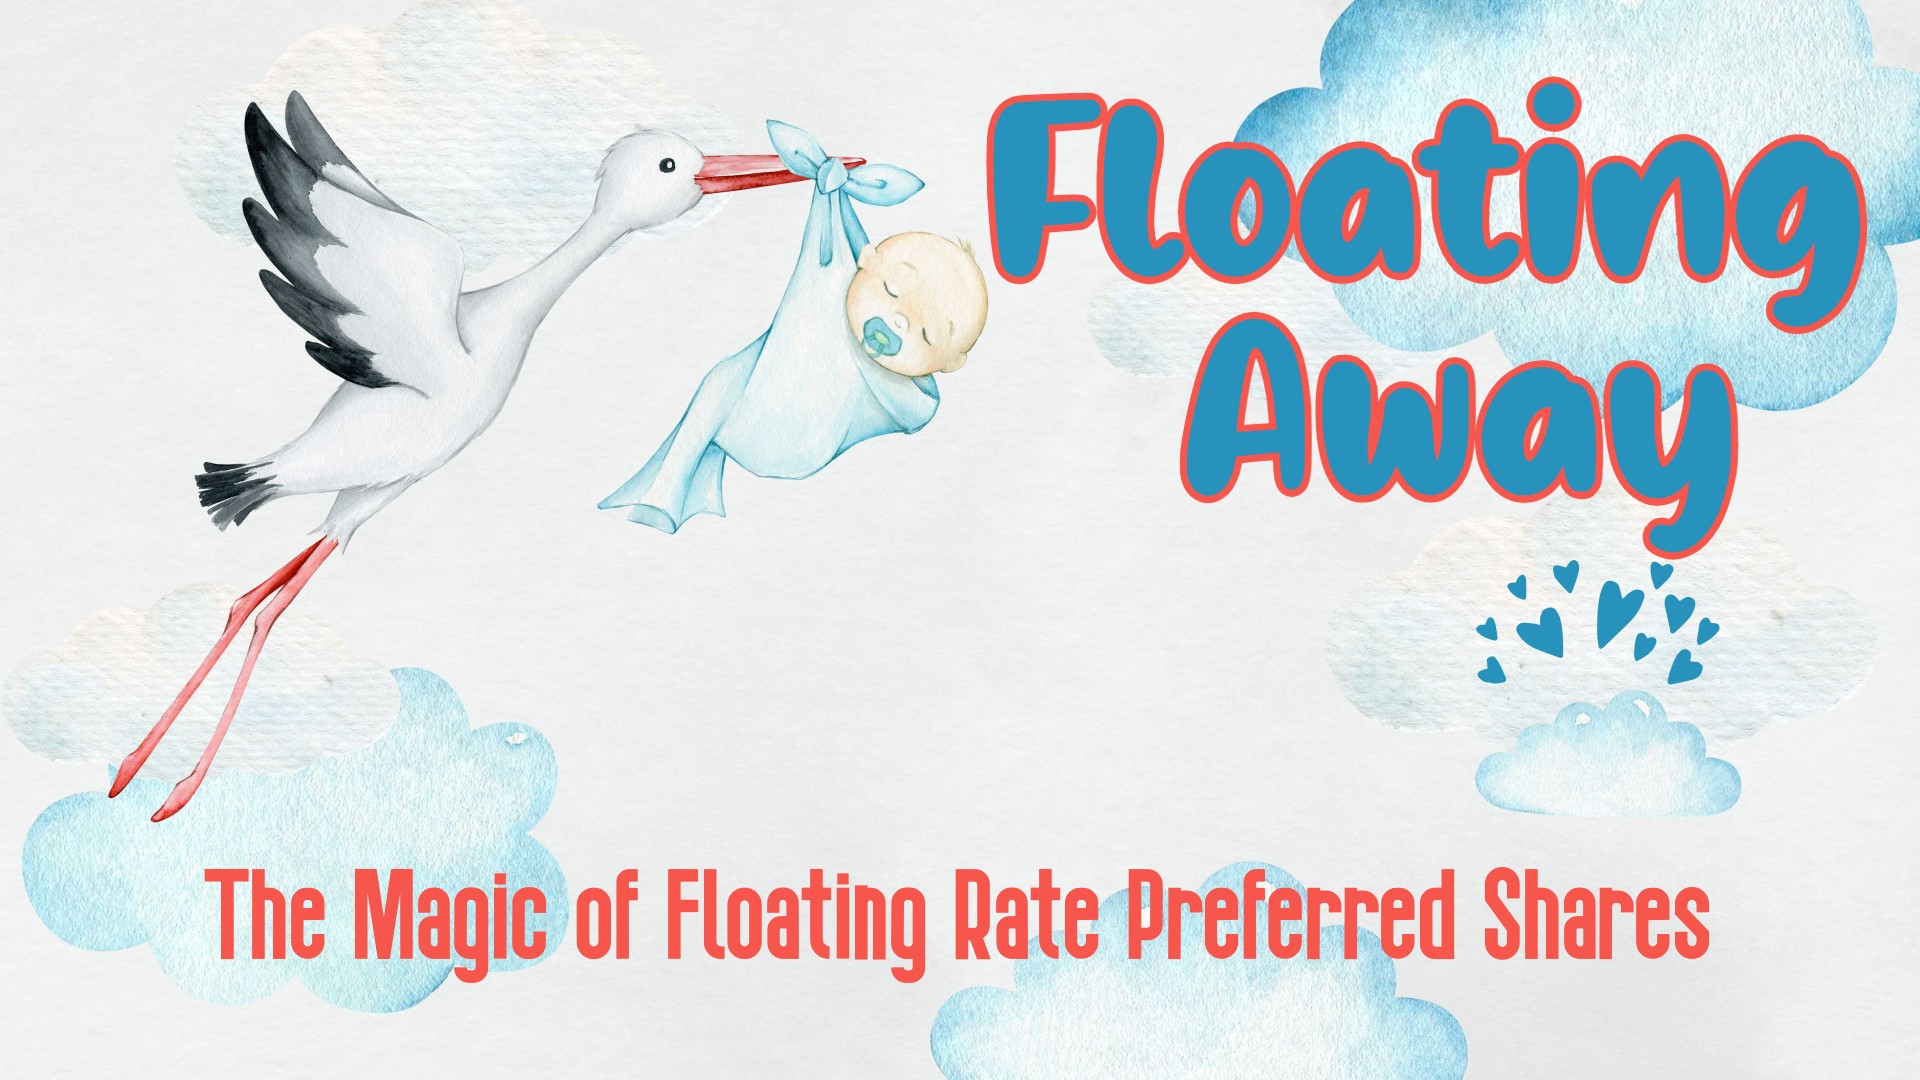 Floating Away Floating Rate Preferred Shares